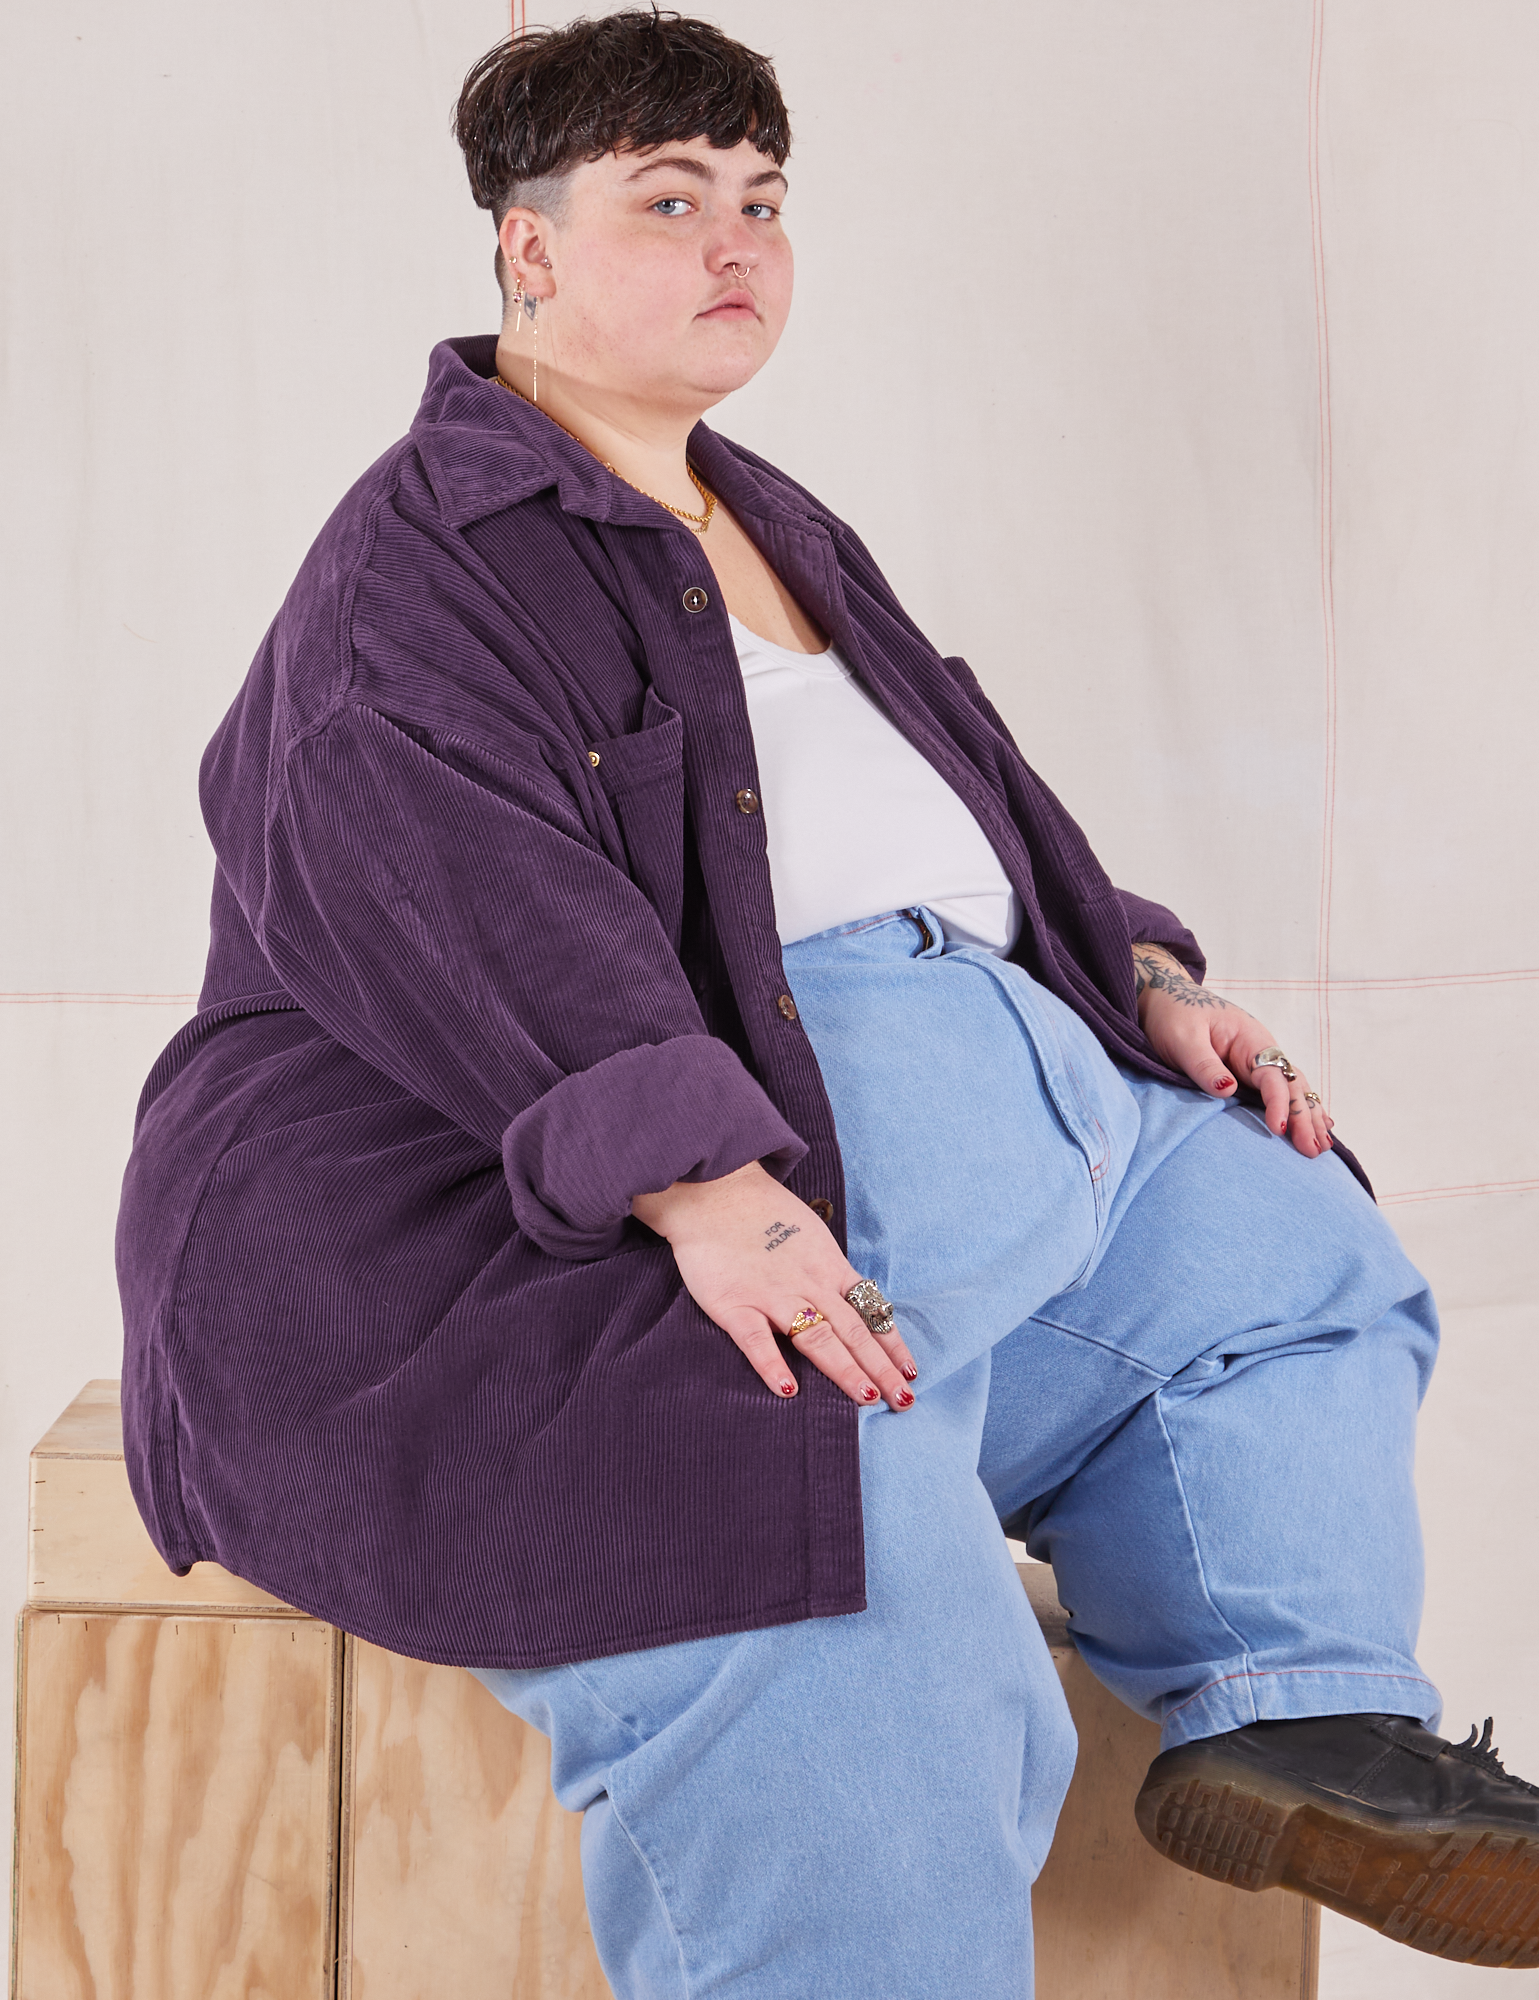 Jordan is wearing Corduroy Overshirt in Nebula Purple with a vintage off-white Cropped Tank Top underneath paired with light wash Denim Trouser Jeans